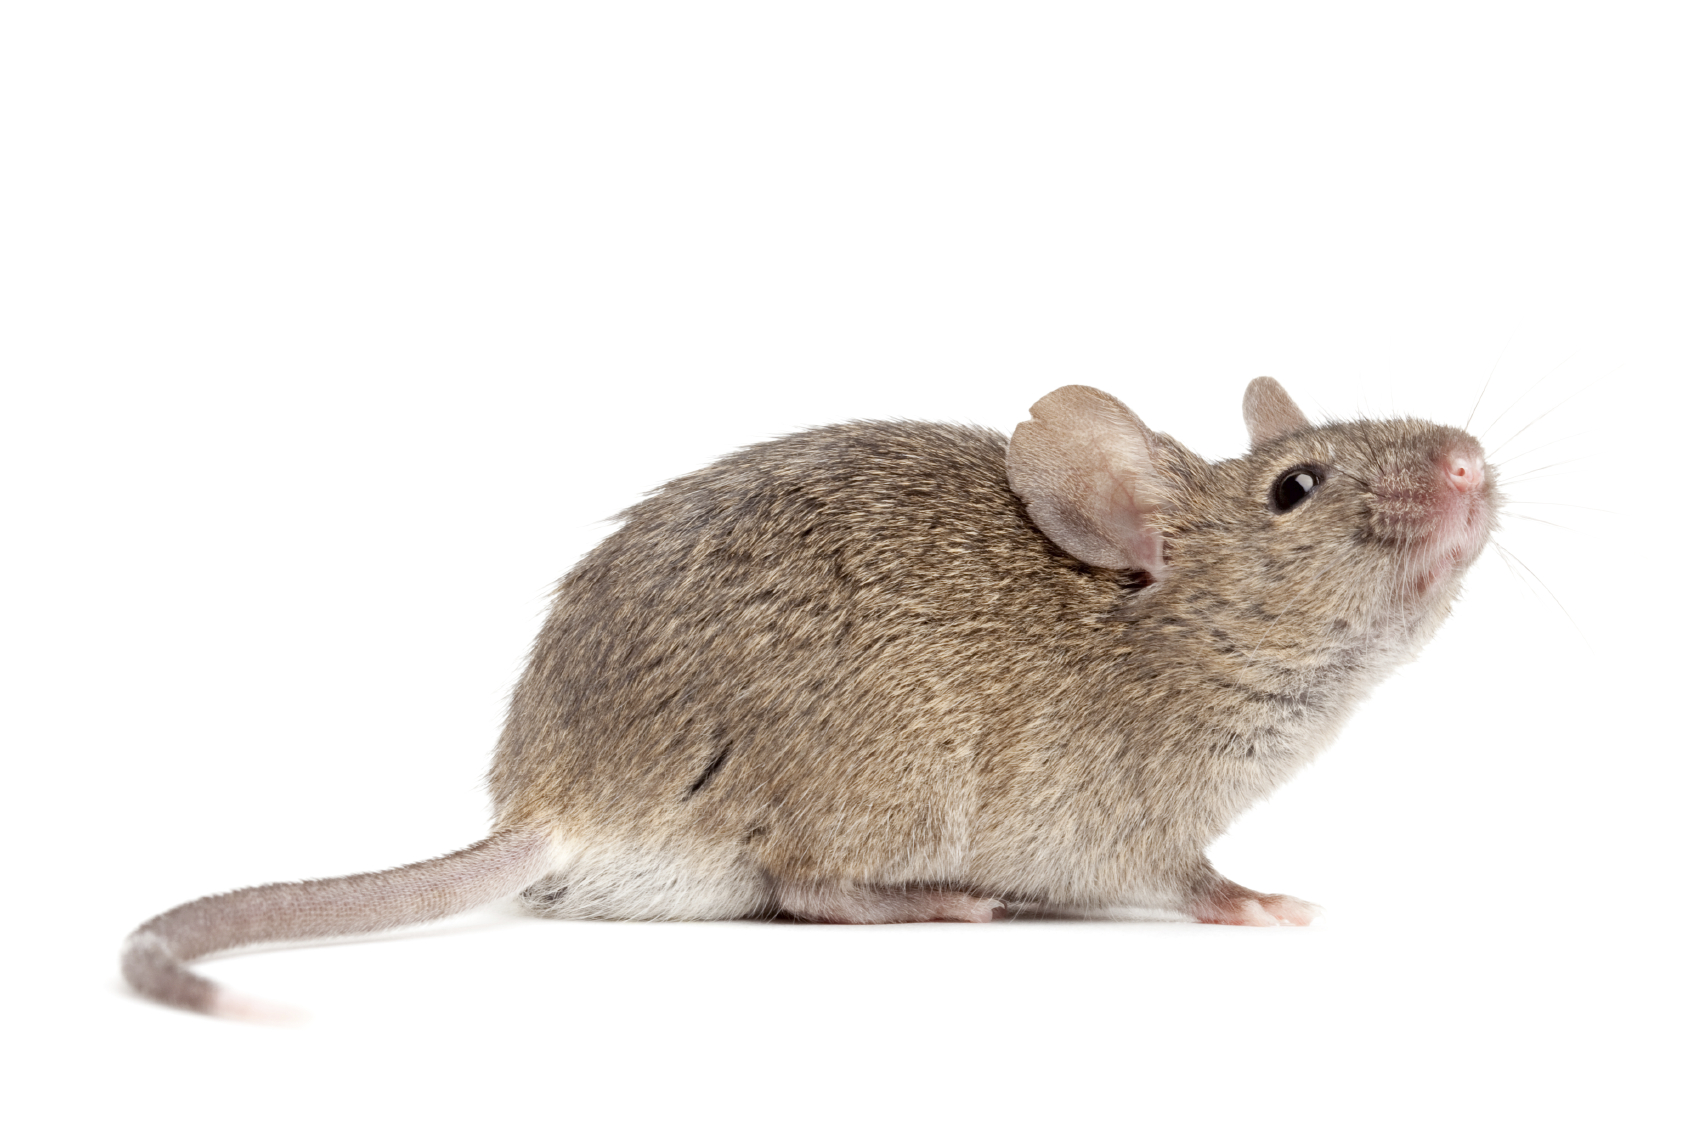 The house mouse can squeeze through an opening the size of a dime.